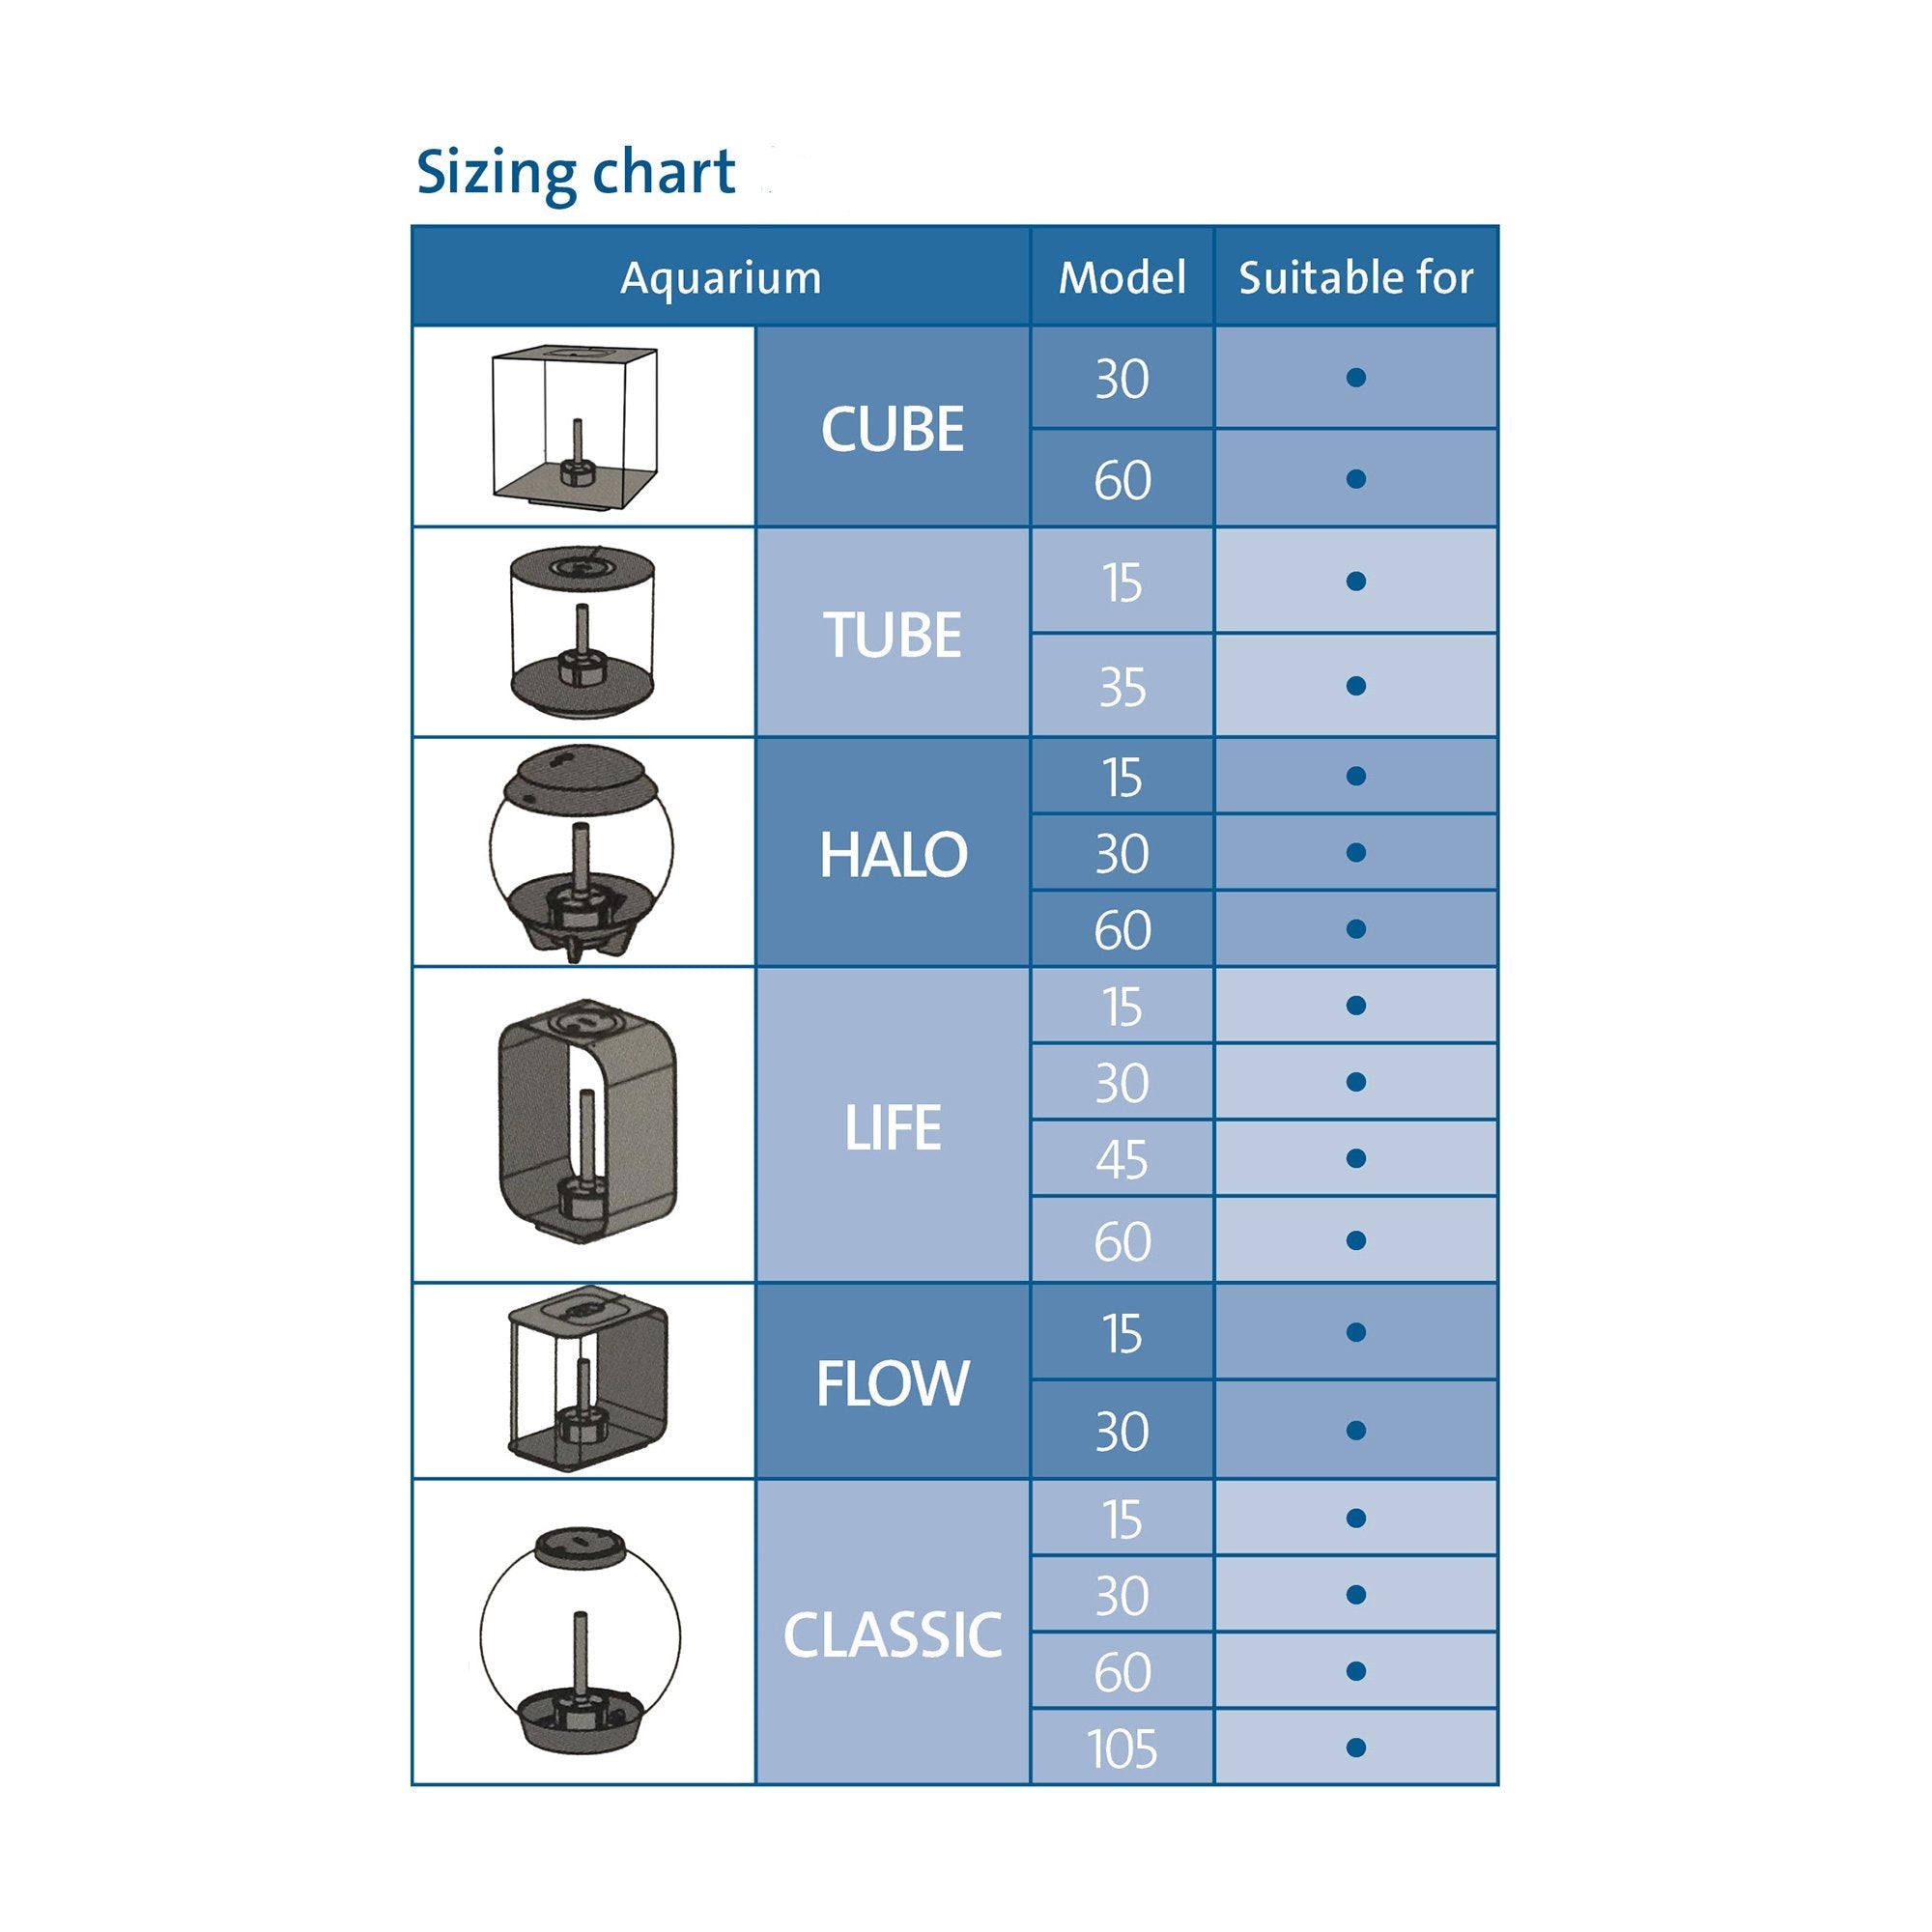 Use the chart to ensure biOrb decor will fit your aquarium